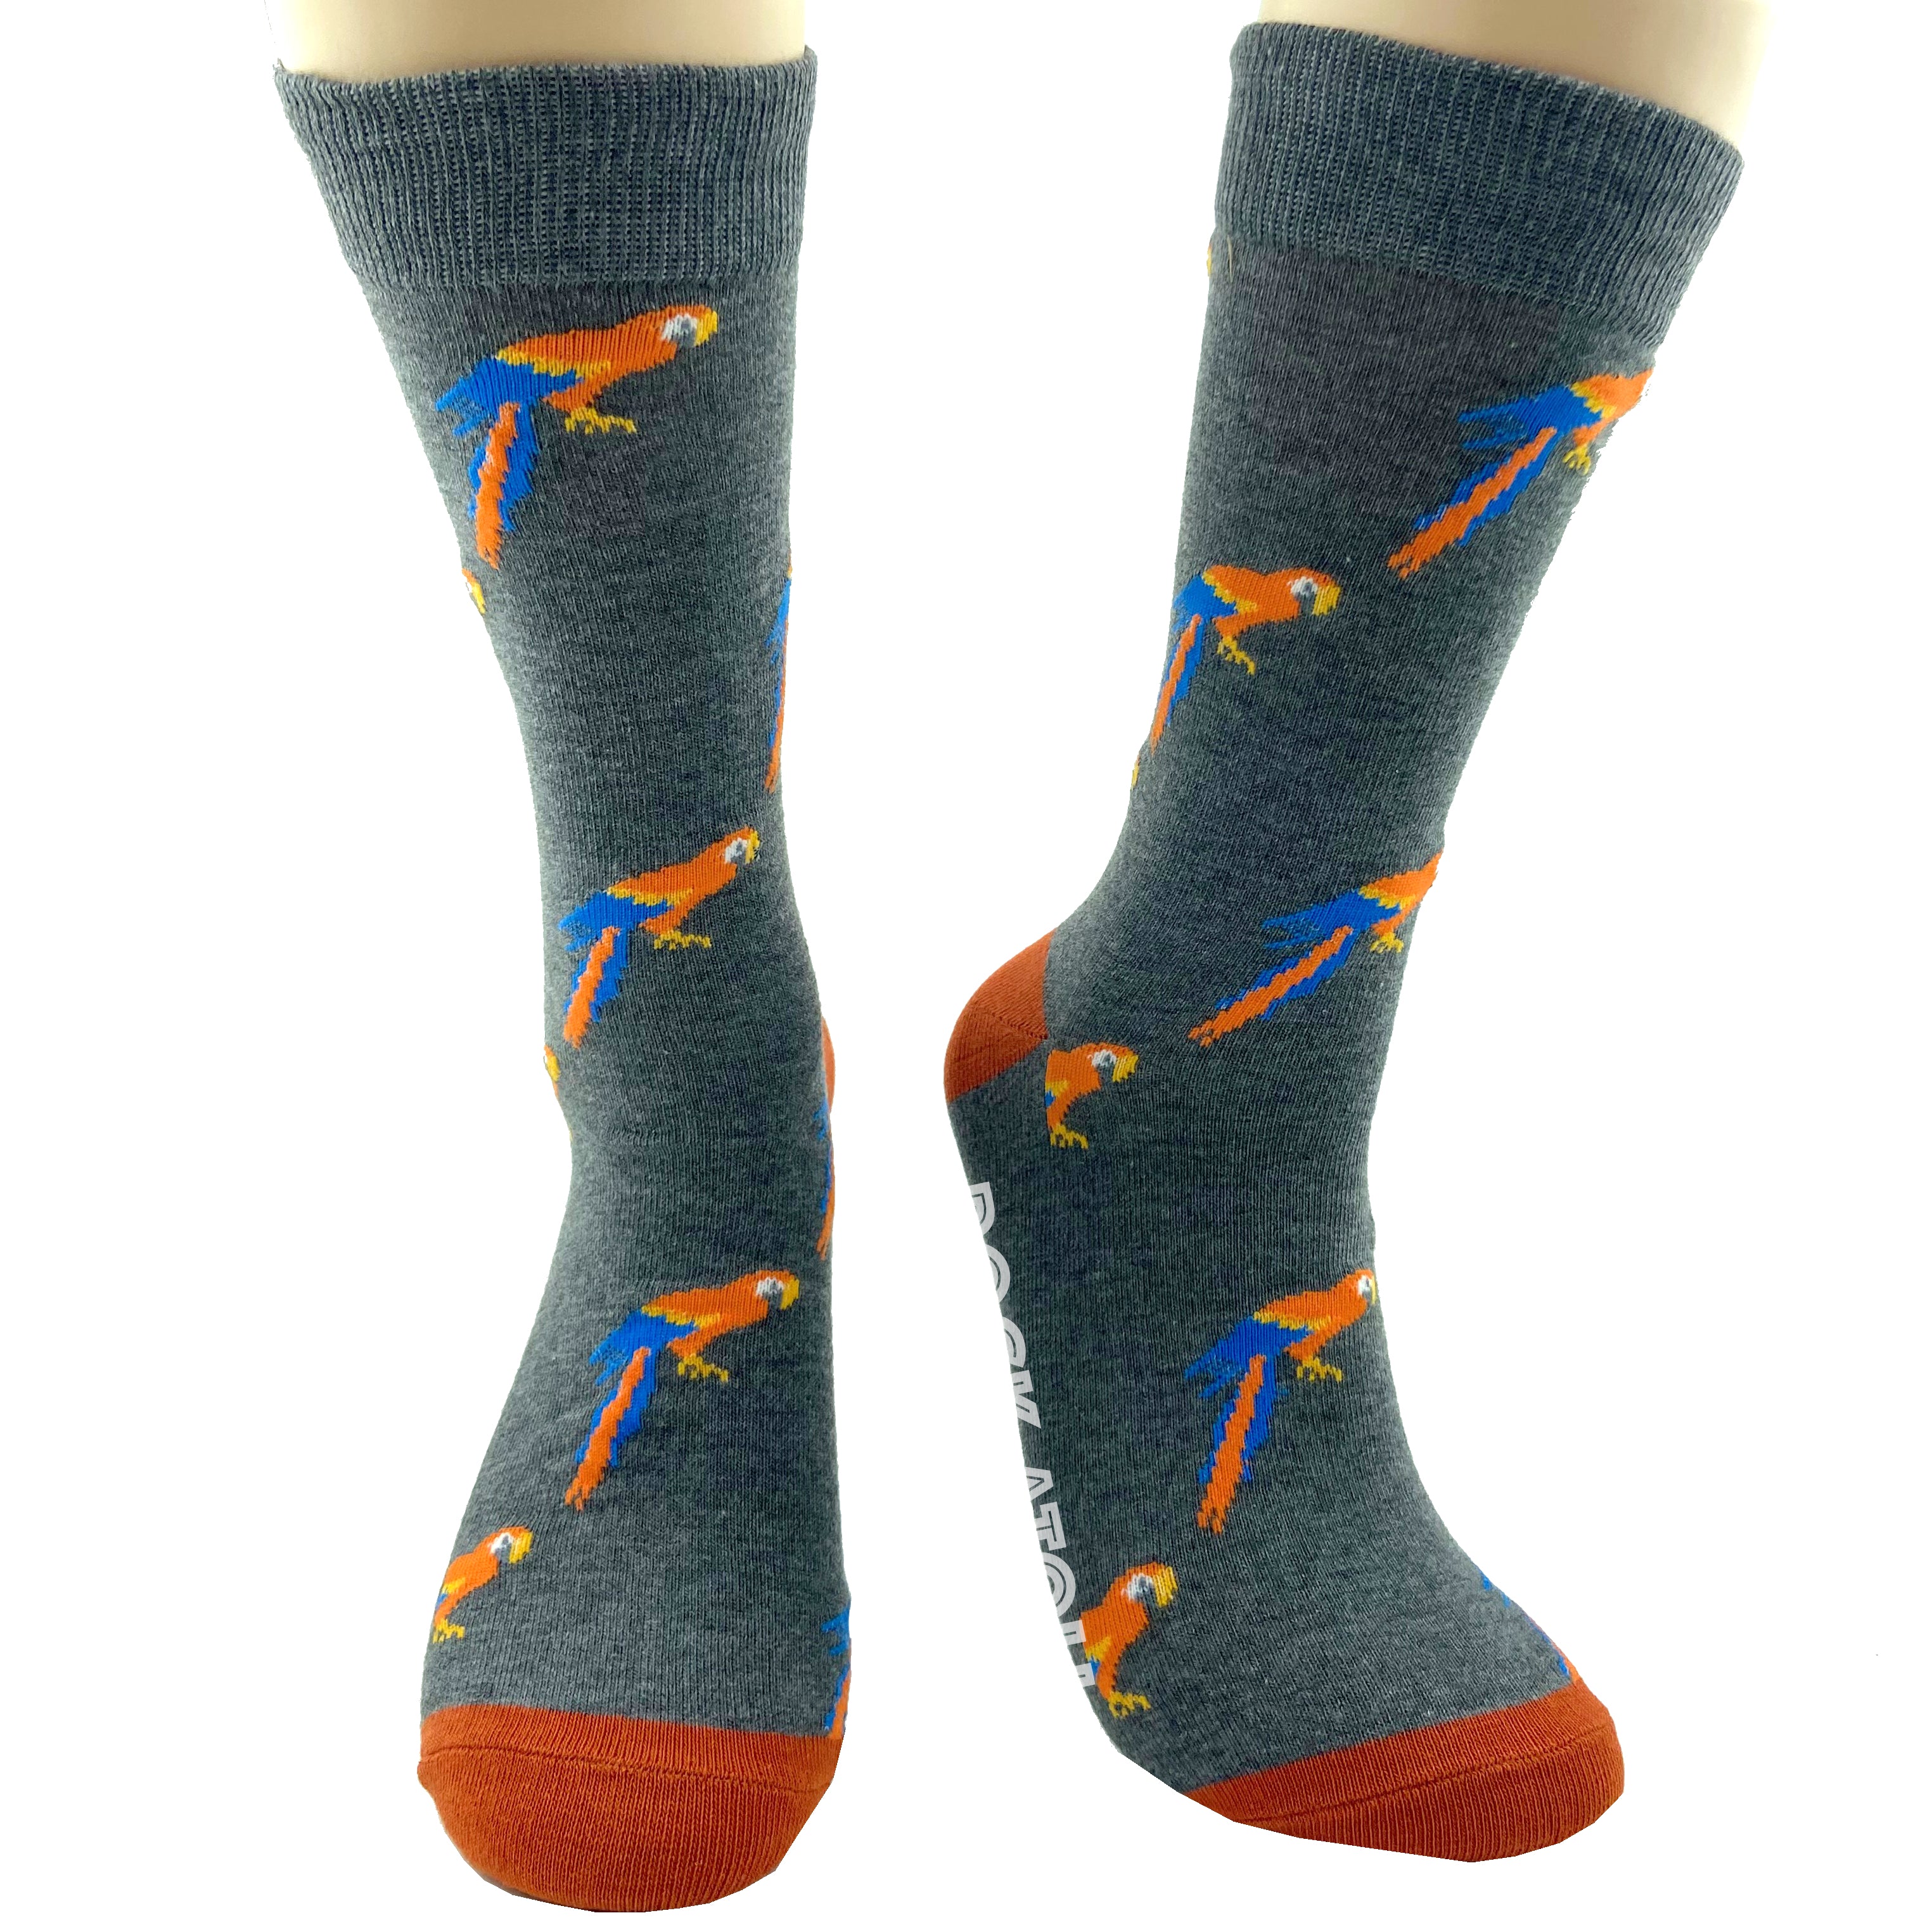 Classic Unisex Tropical Bird Scarlet Red Macaw Parrot Novelty Socks